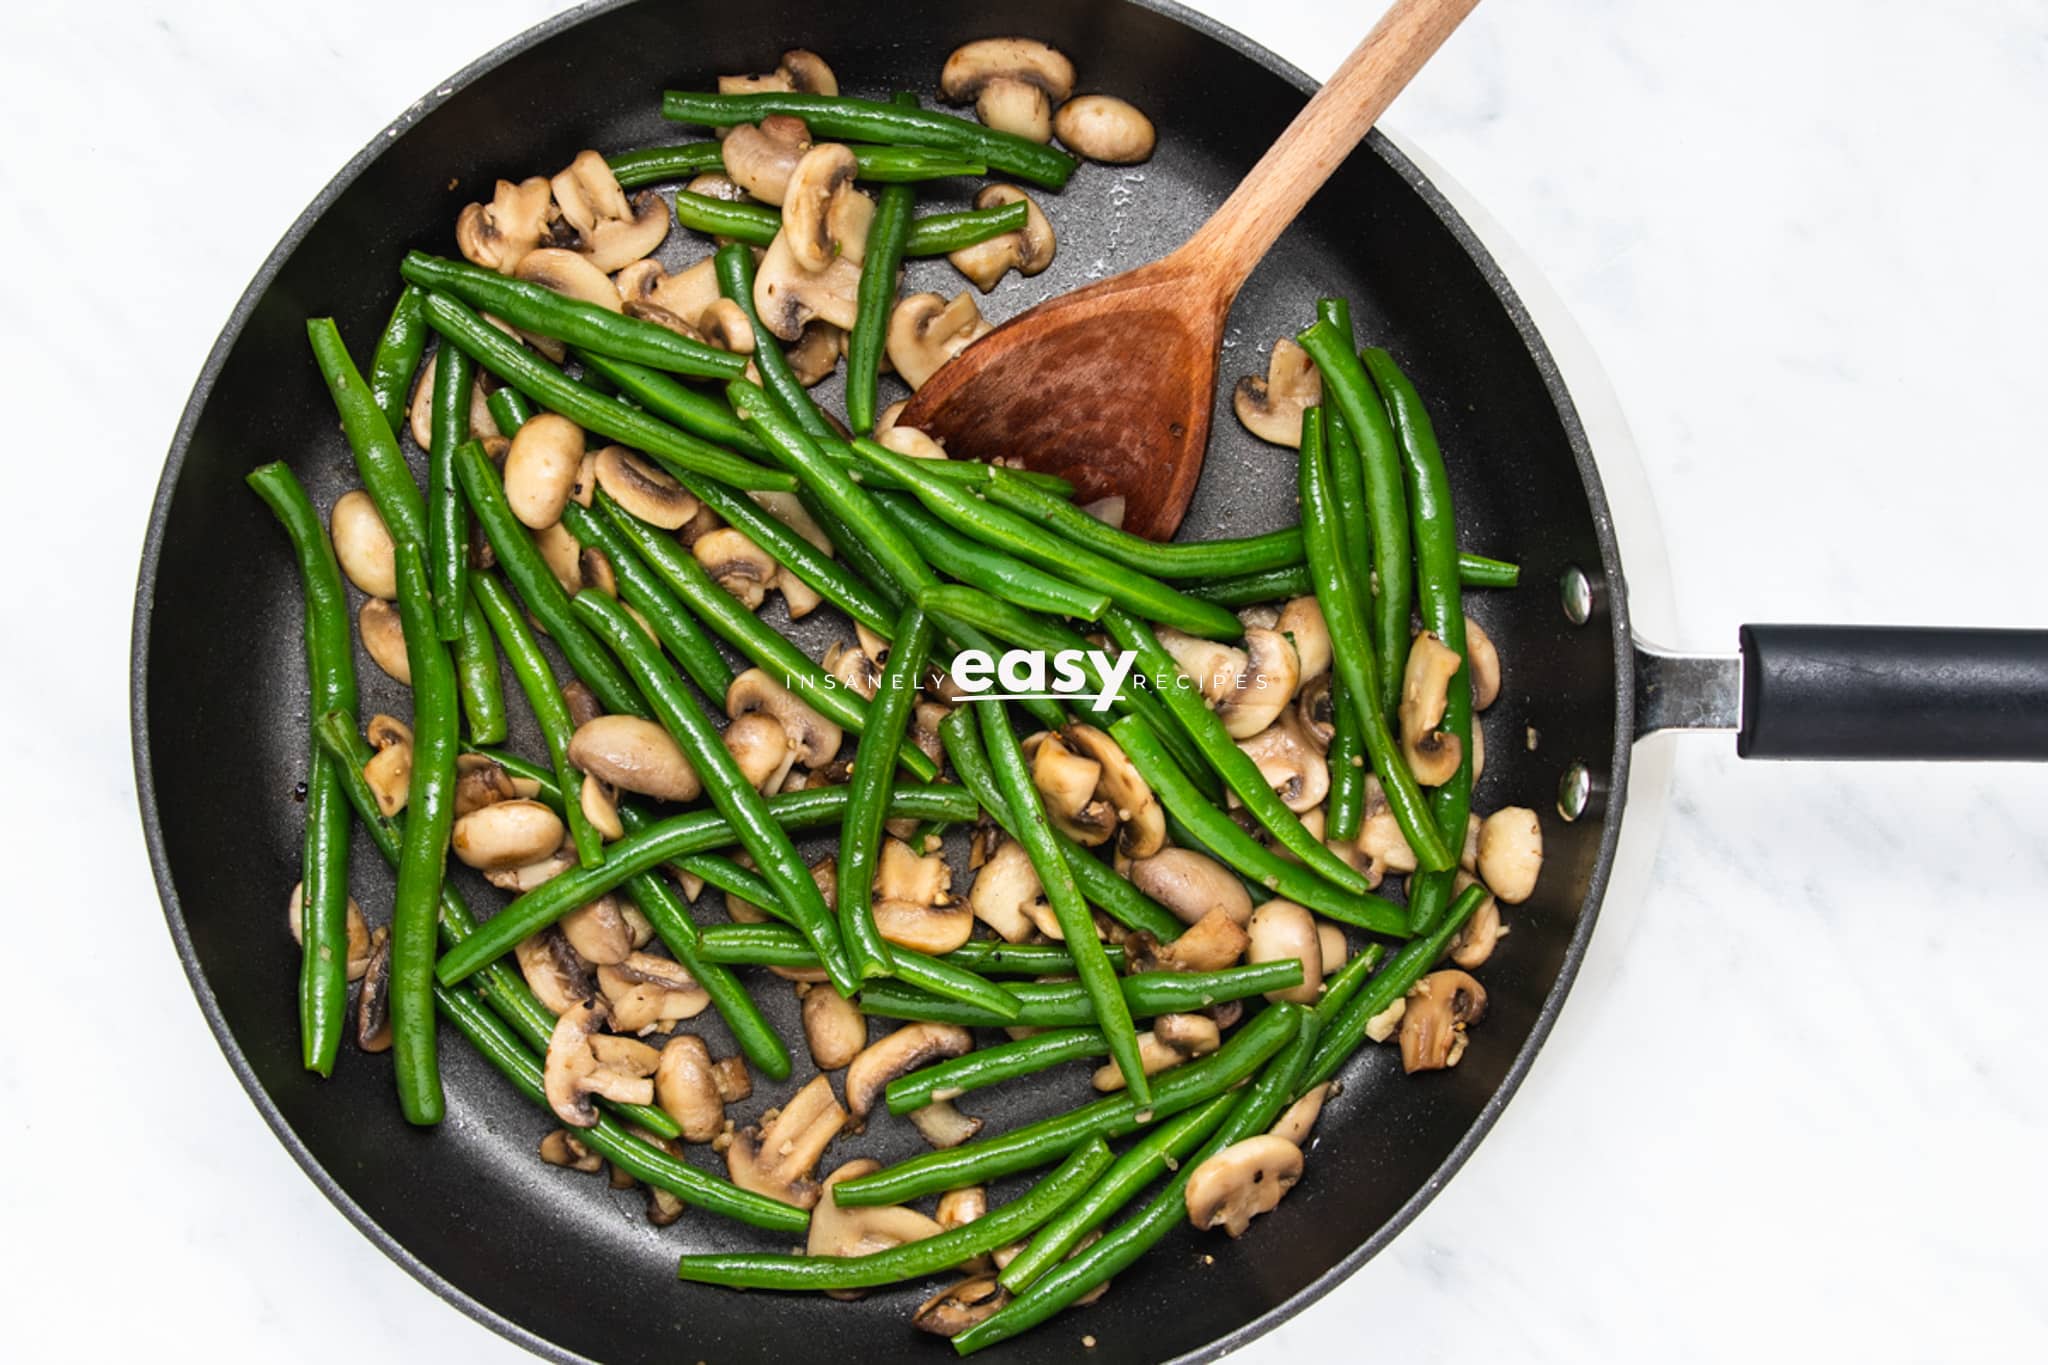 green beans and mushrooms sauteed in a frying pan with a wooden spoon.